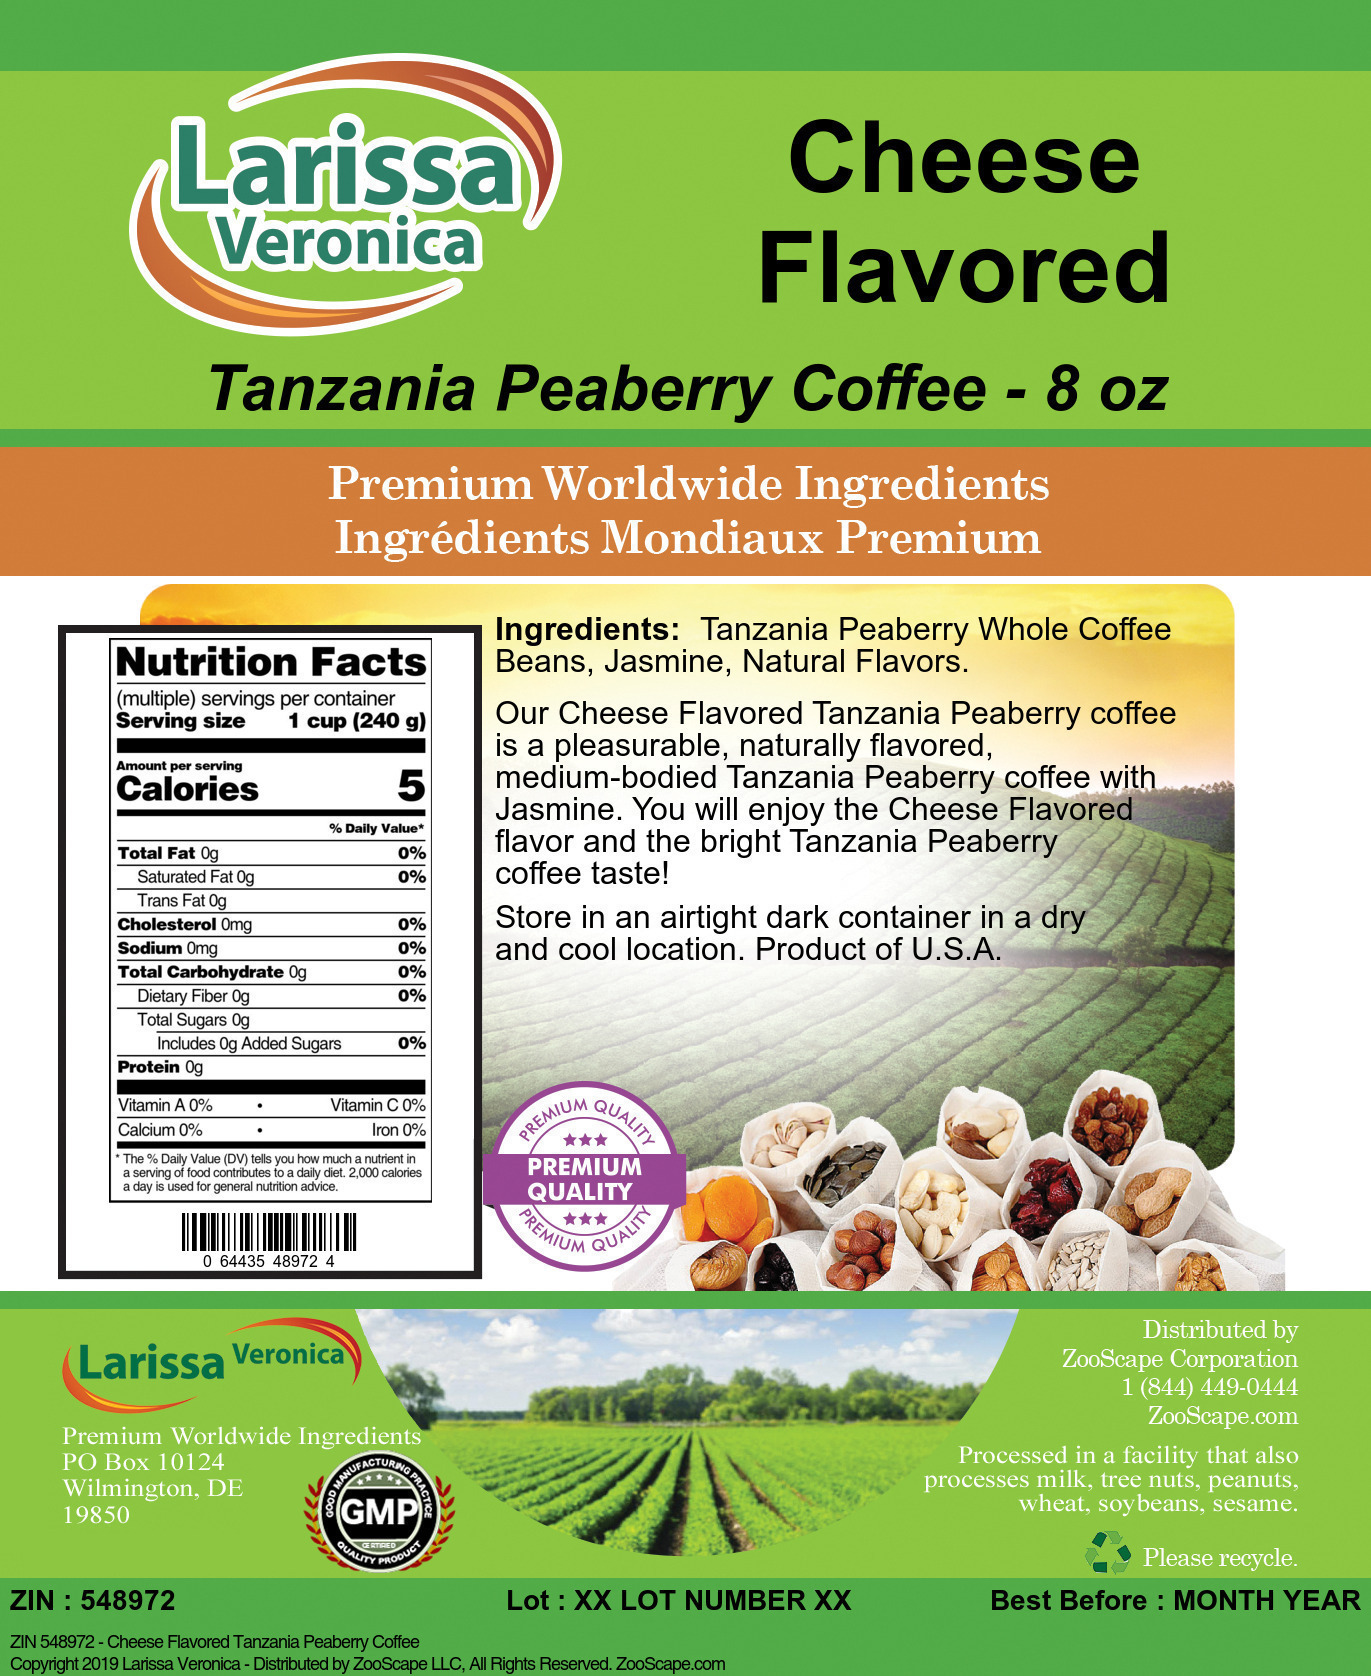 Cheese Flavored Tanzania Peaberry Coffee - Label